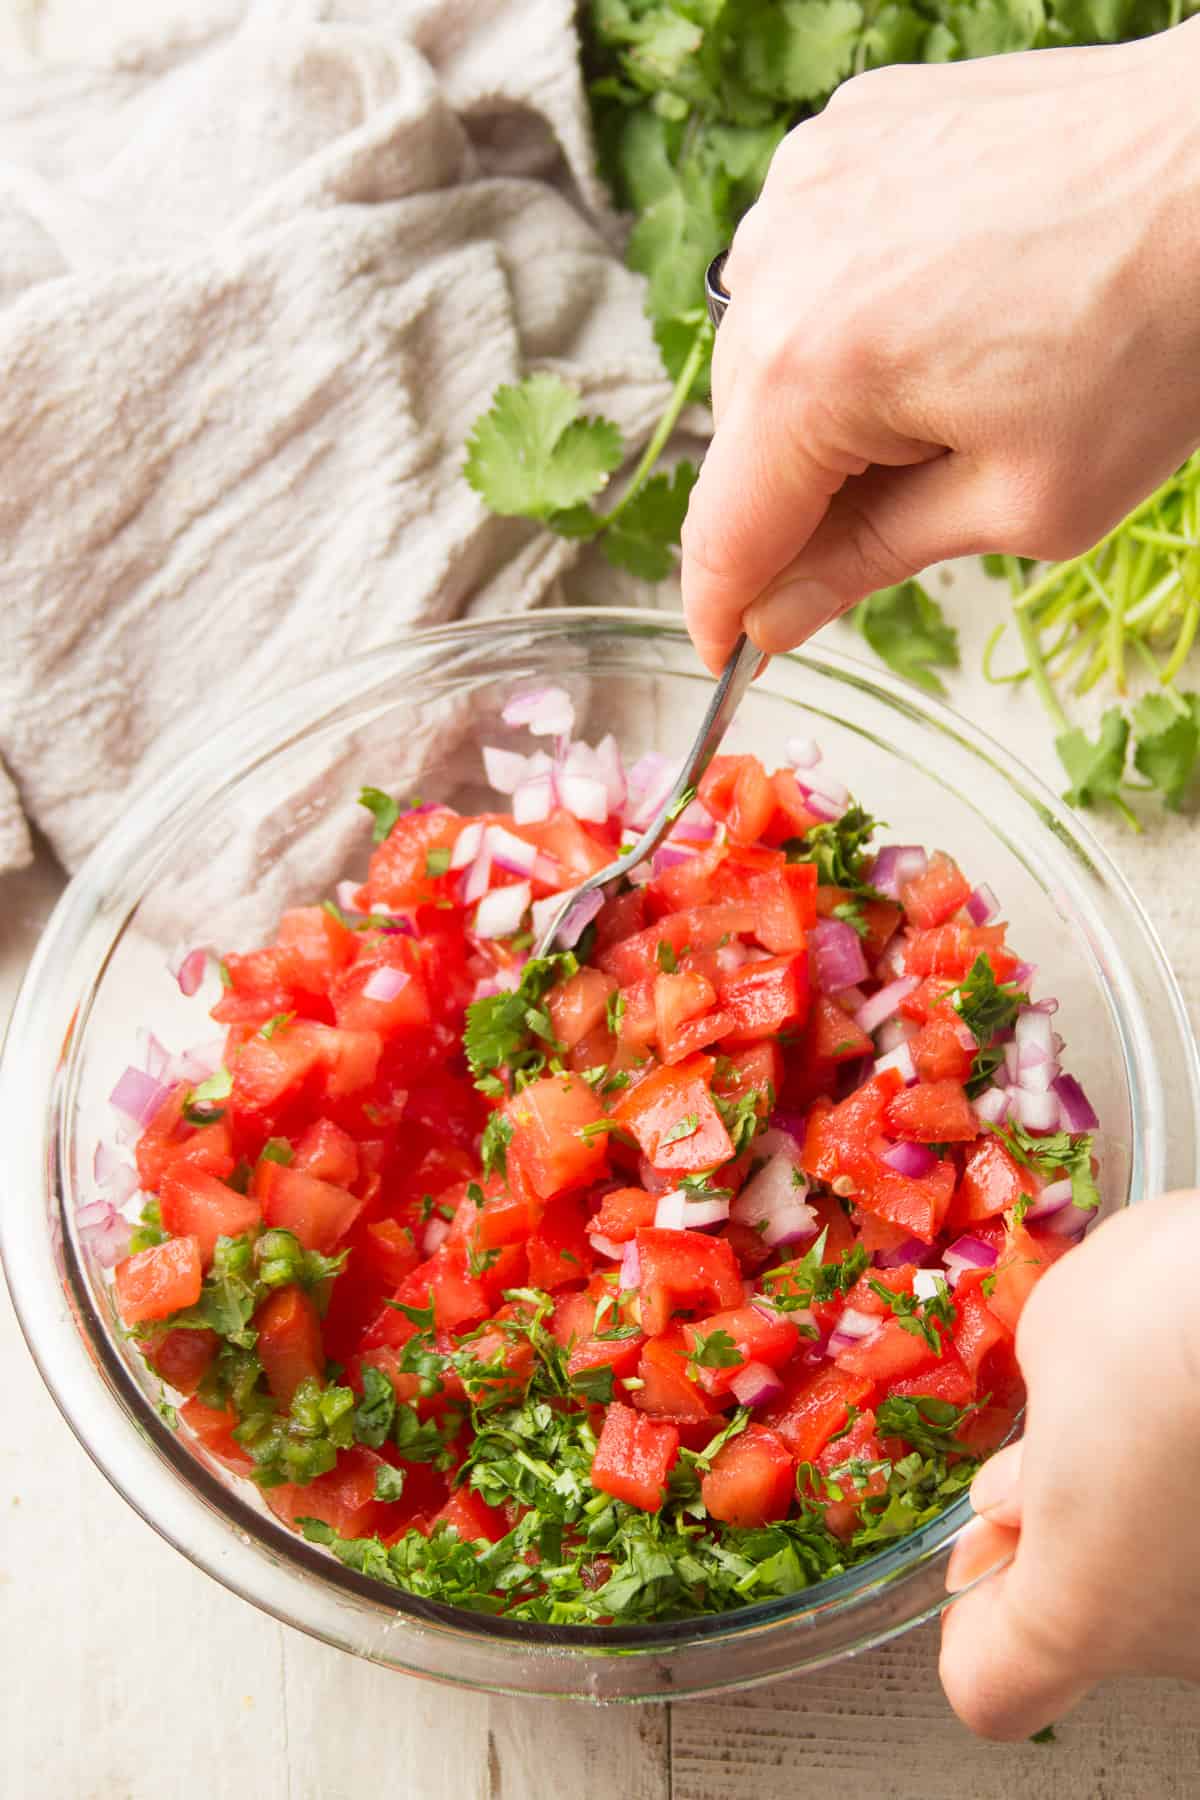 Hand Stirring Ingredients for Pico de Gallo Together in a Bowl